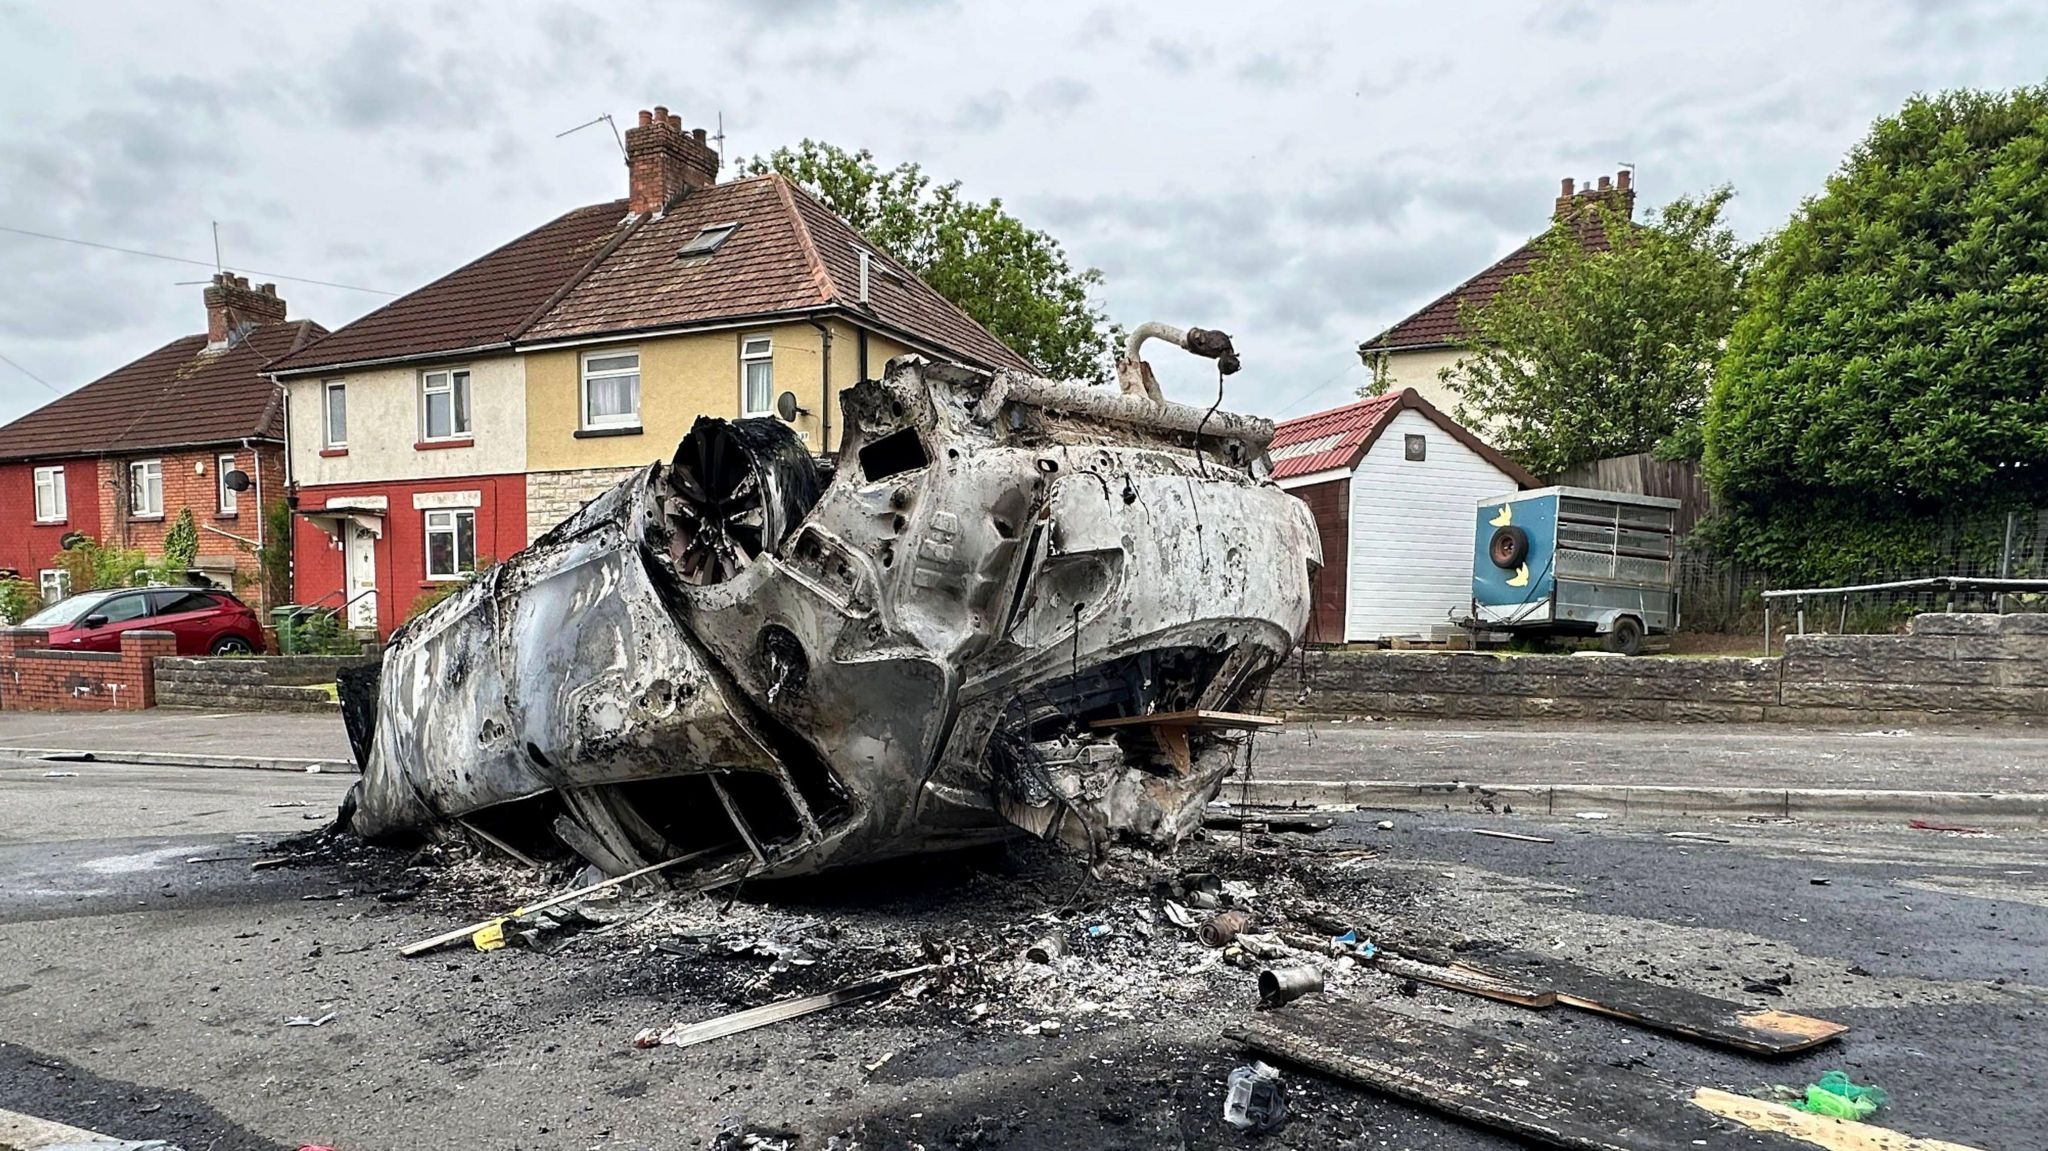 A burnt out car the day after the riot in Ely, Cardiff